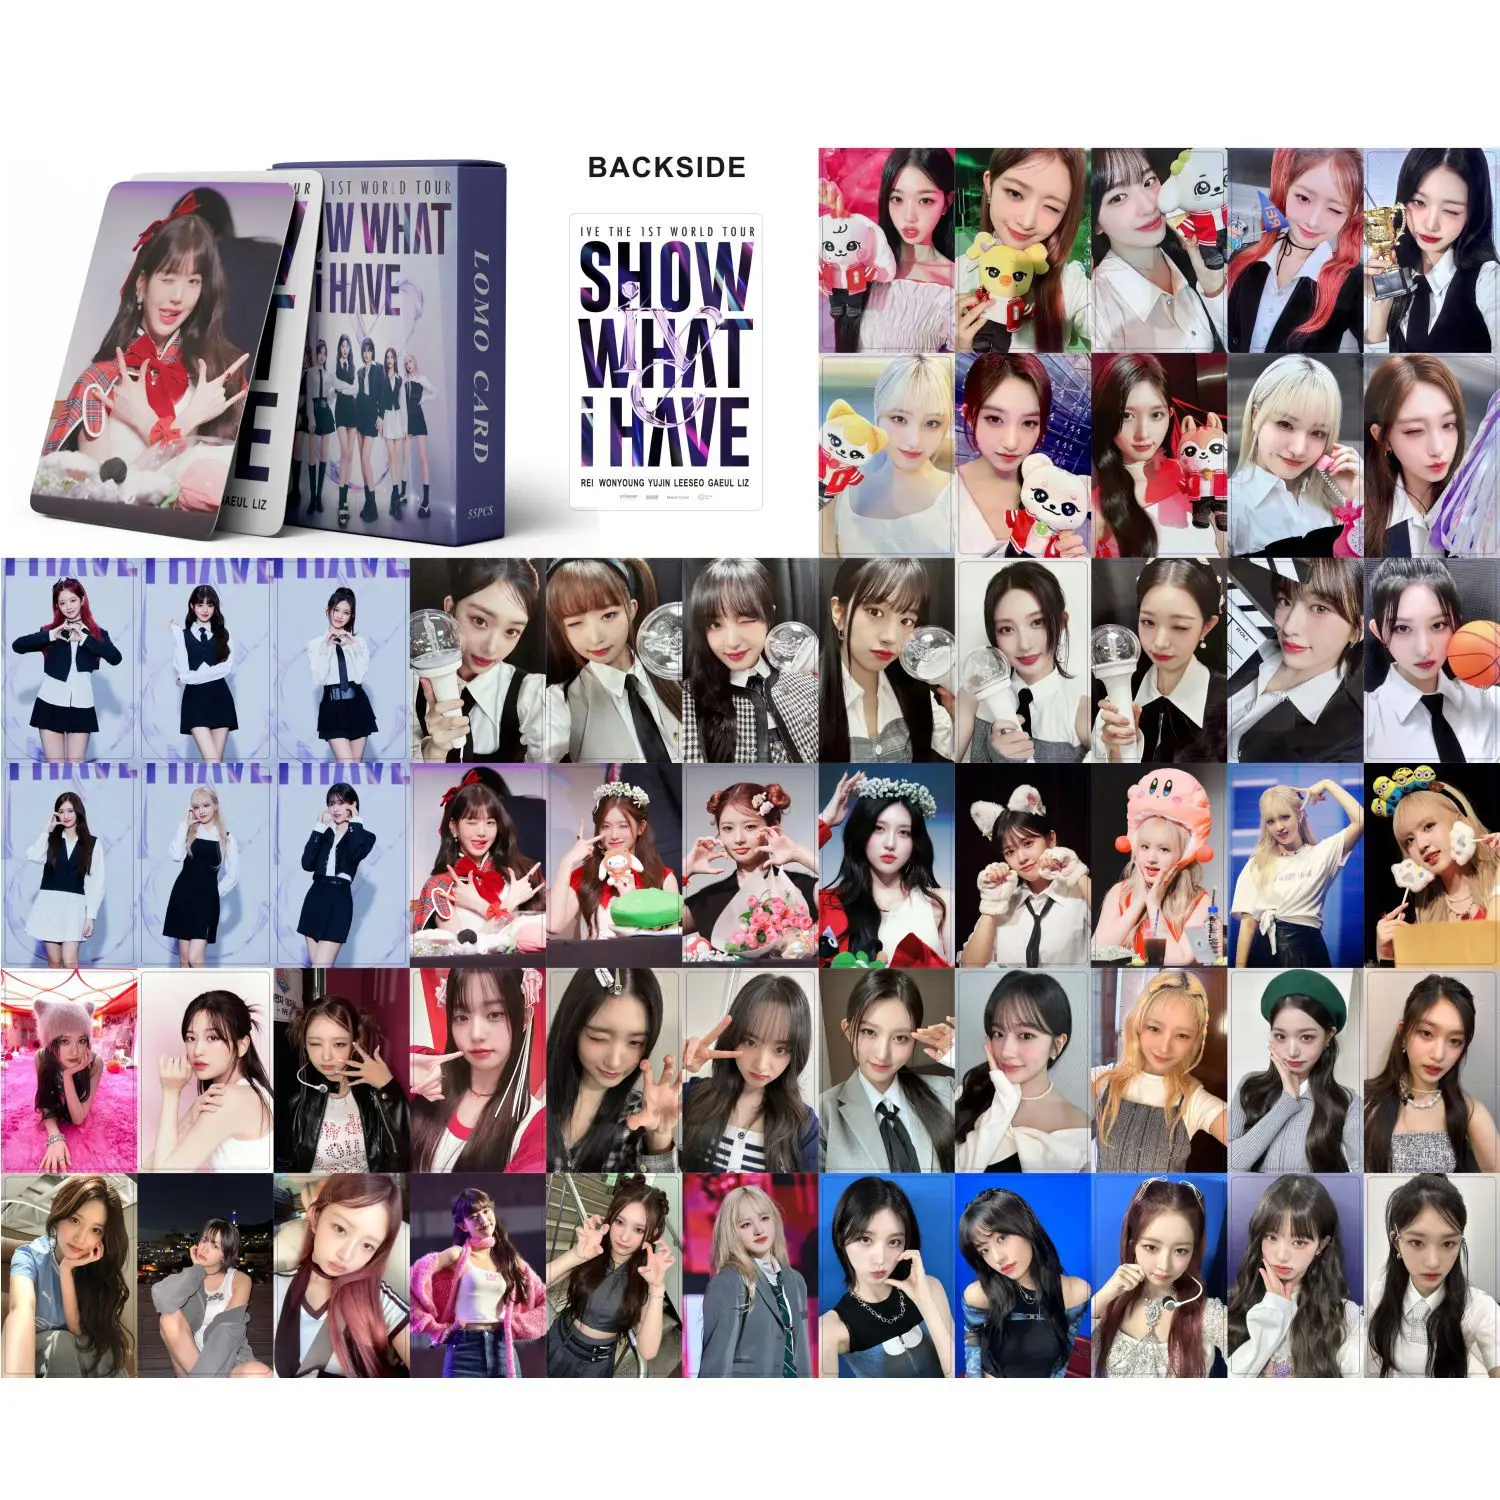 55 шт./компл. открыток Kpop IVE Lomo SHOW WHAT IVE Photocards for fans collection Изображение 1 